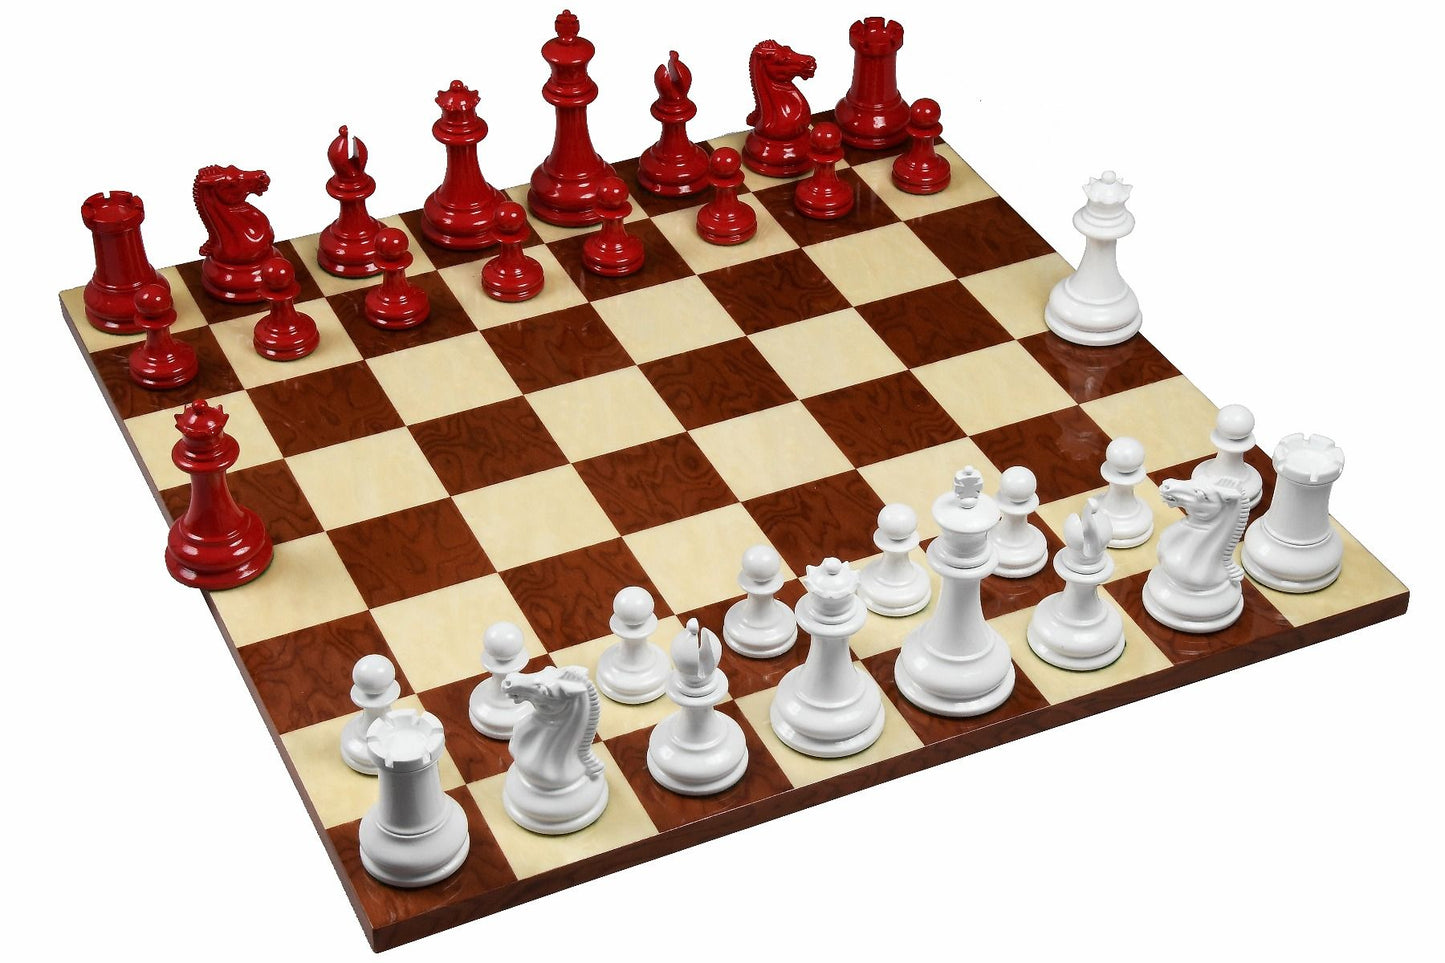 Combo of Reproduced 1849 Original Staunton Pattern Chess Pieces in Lacquer Finished Painted Crimson & Ivory White - 4.5" King with Red Ash Burl Maple Hi Gloss Finish Chess Board - 19"